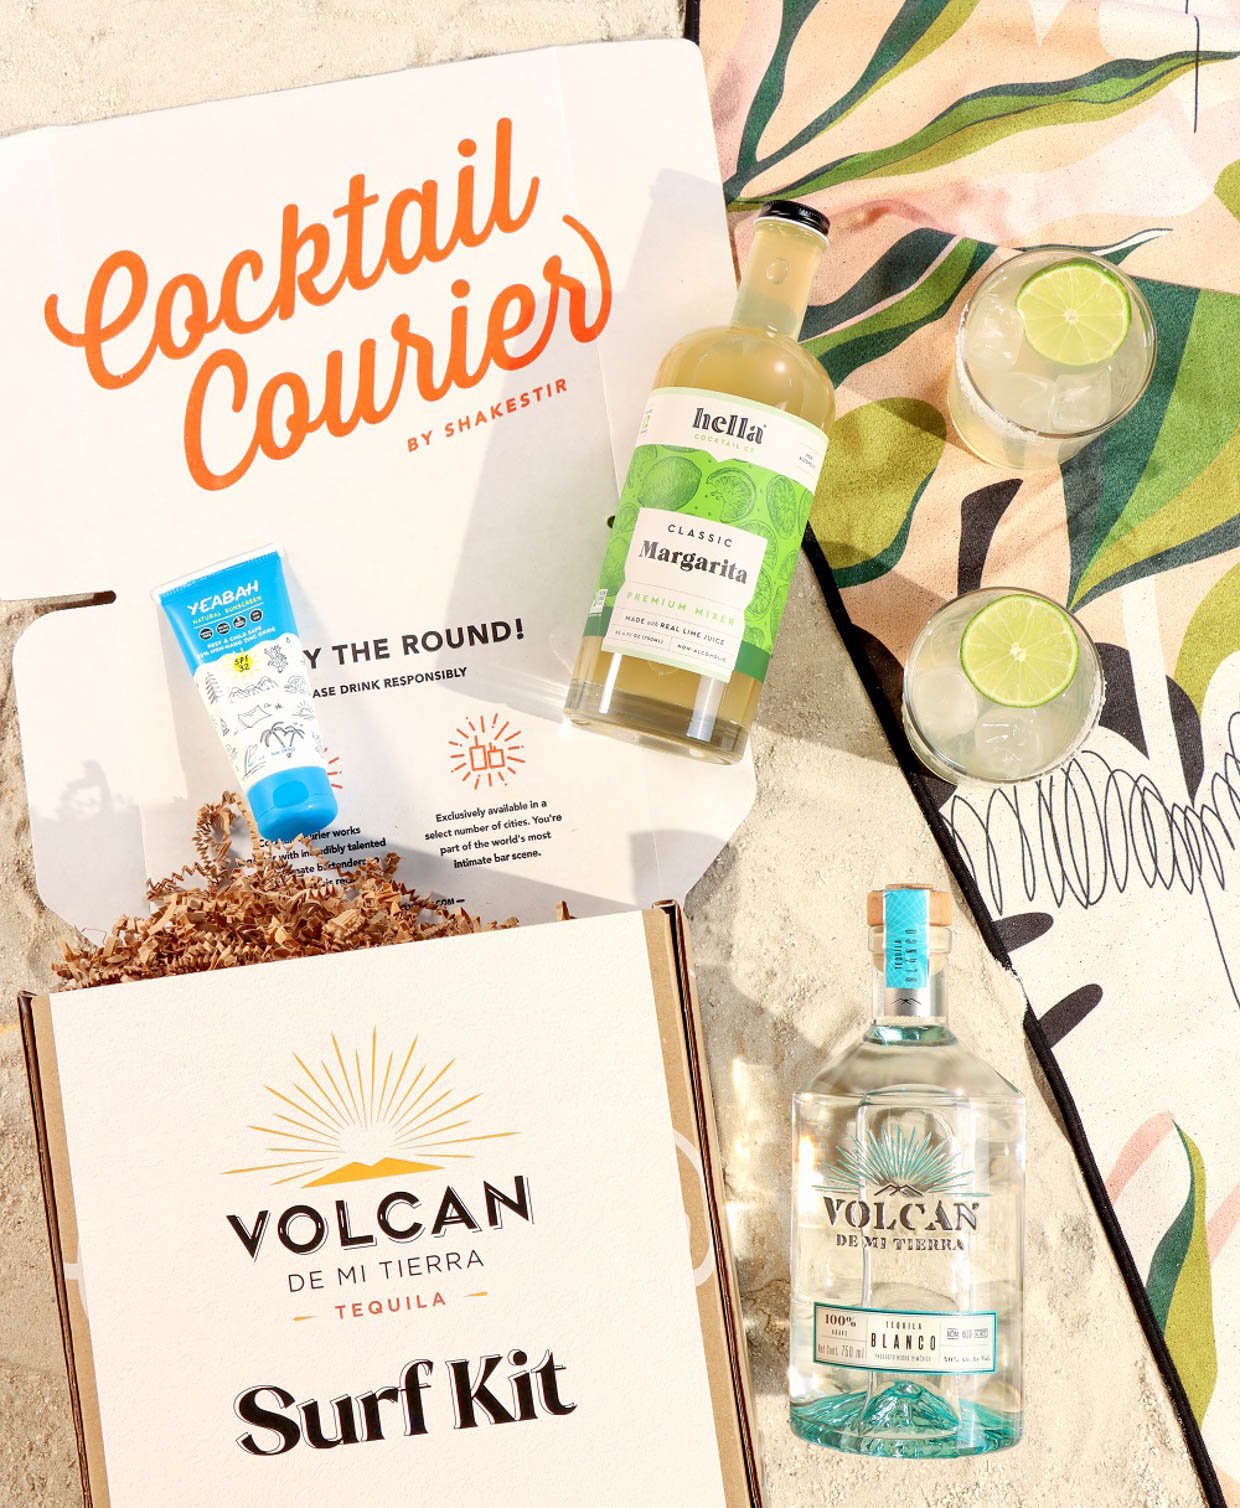 Cocktail Courier Surf Kit